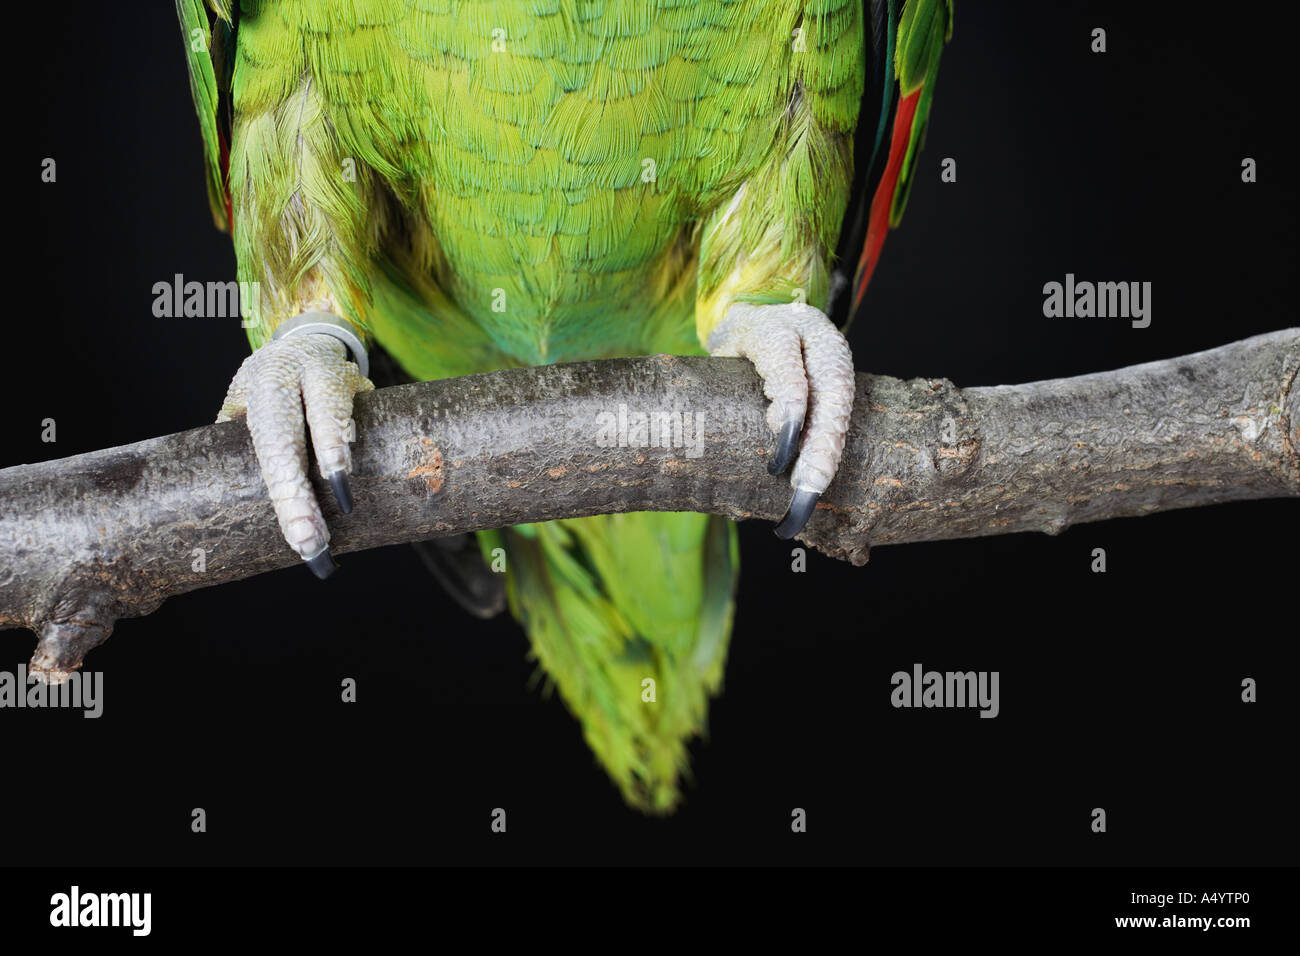 Feet of parrot on branch Stock Photo